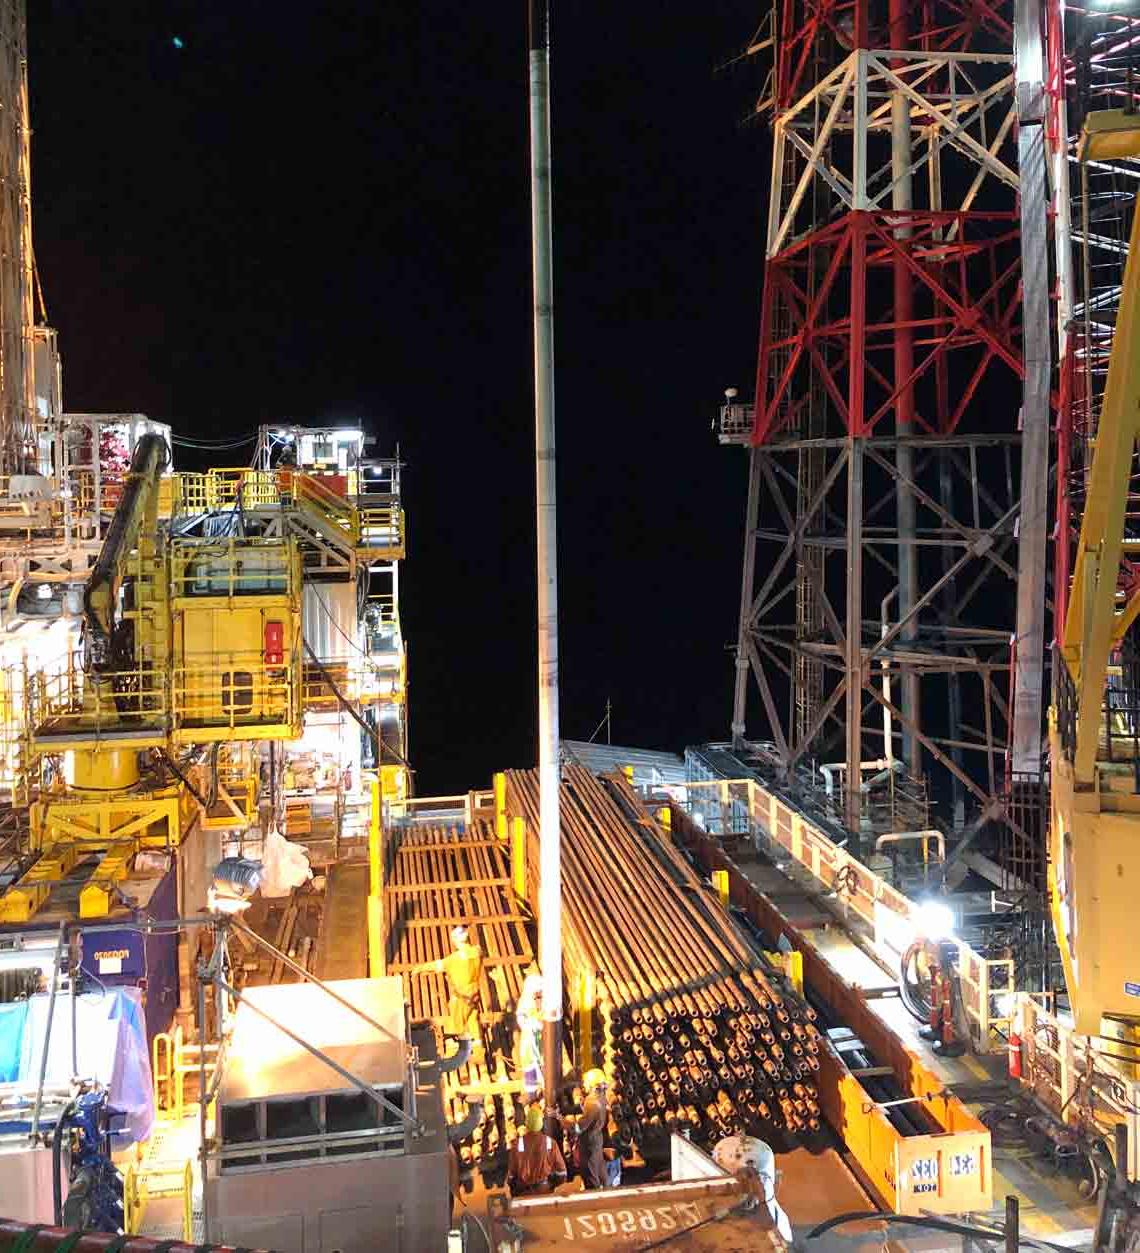 Rig floor at night with a crane lifting one of the expandable steel patches used for casing repair.  